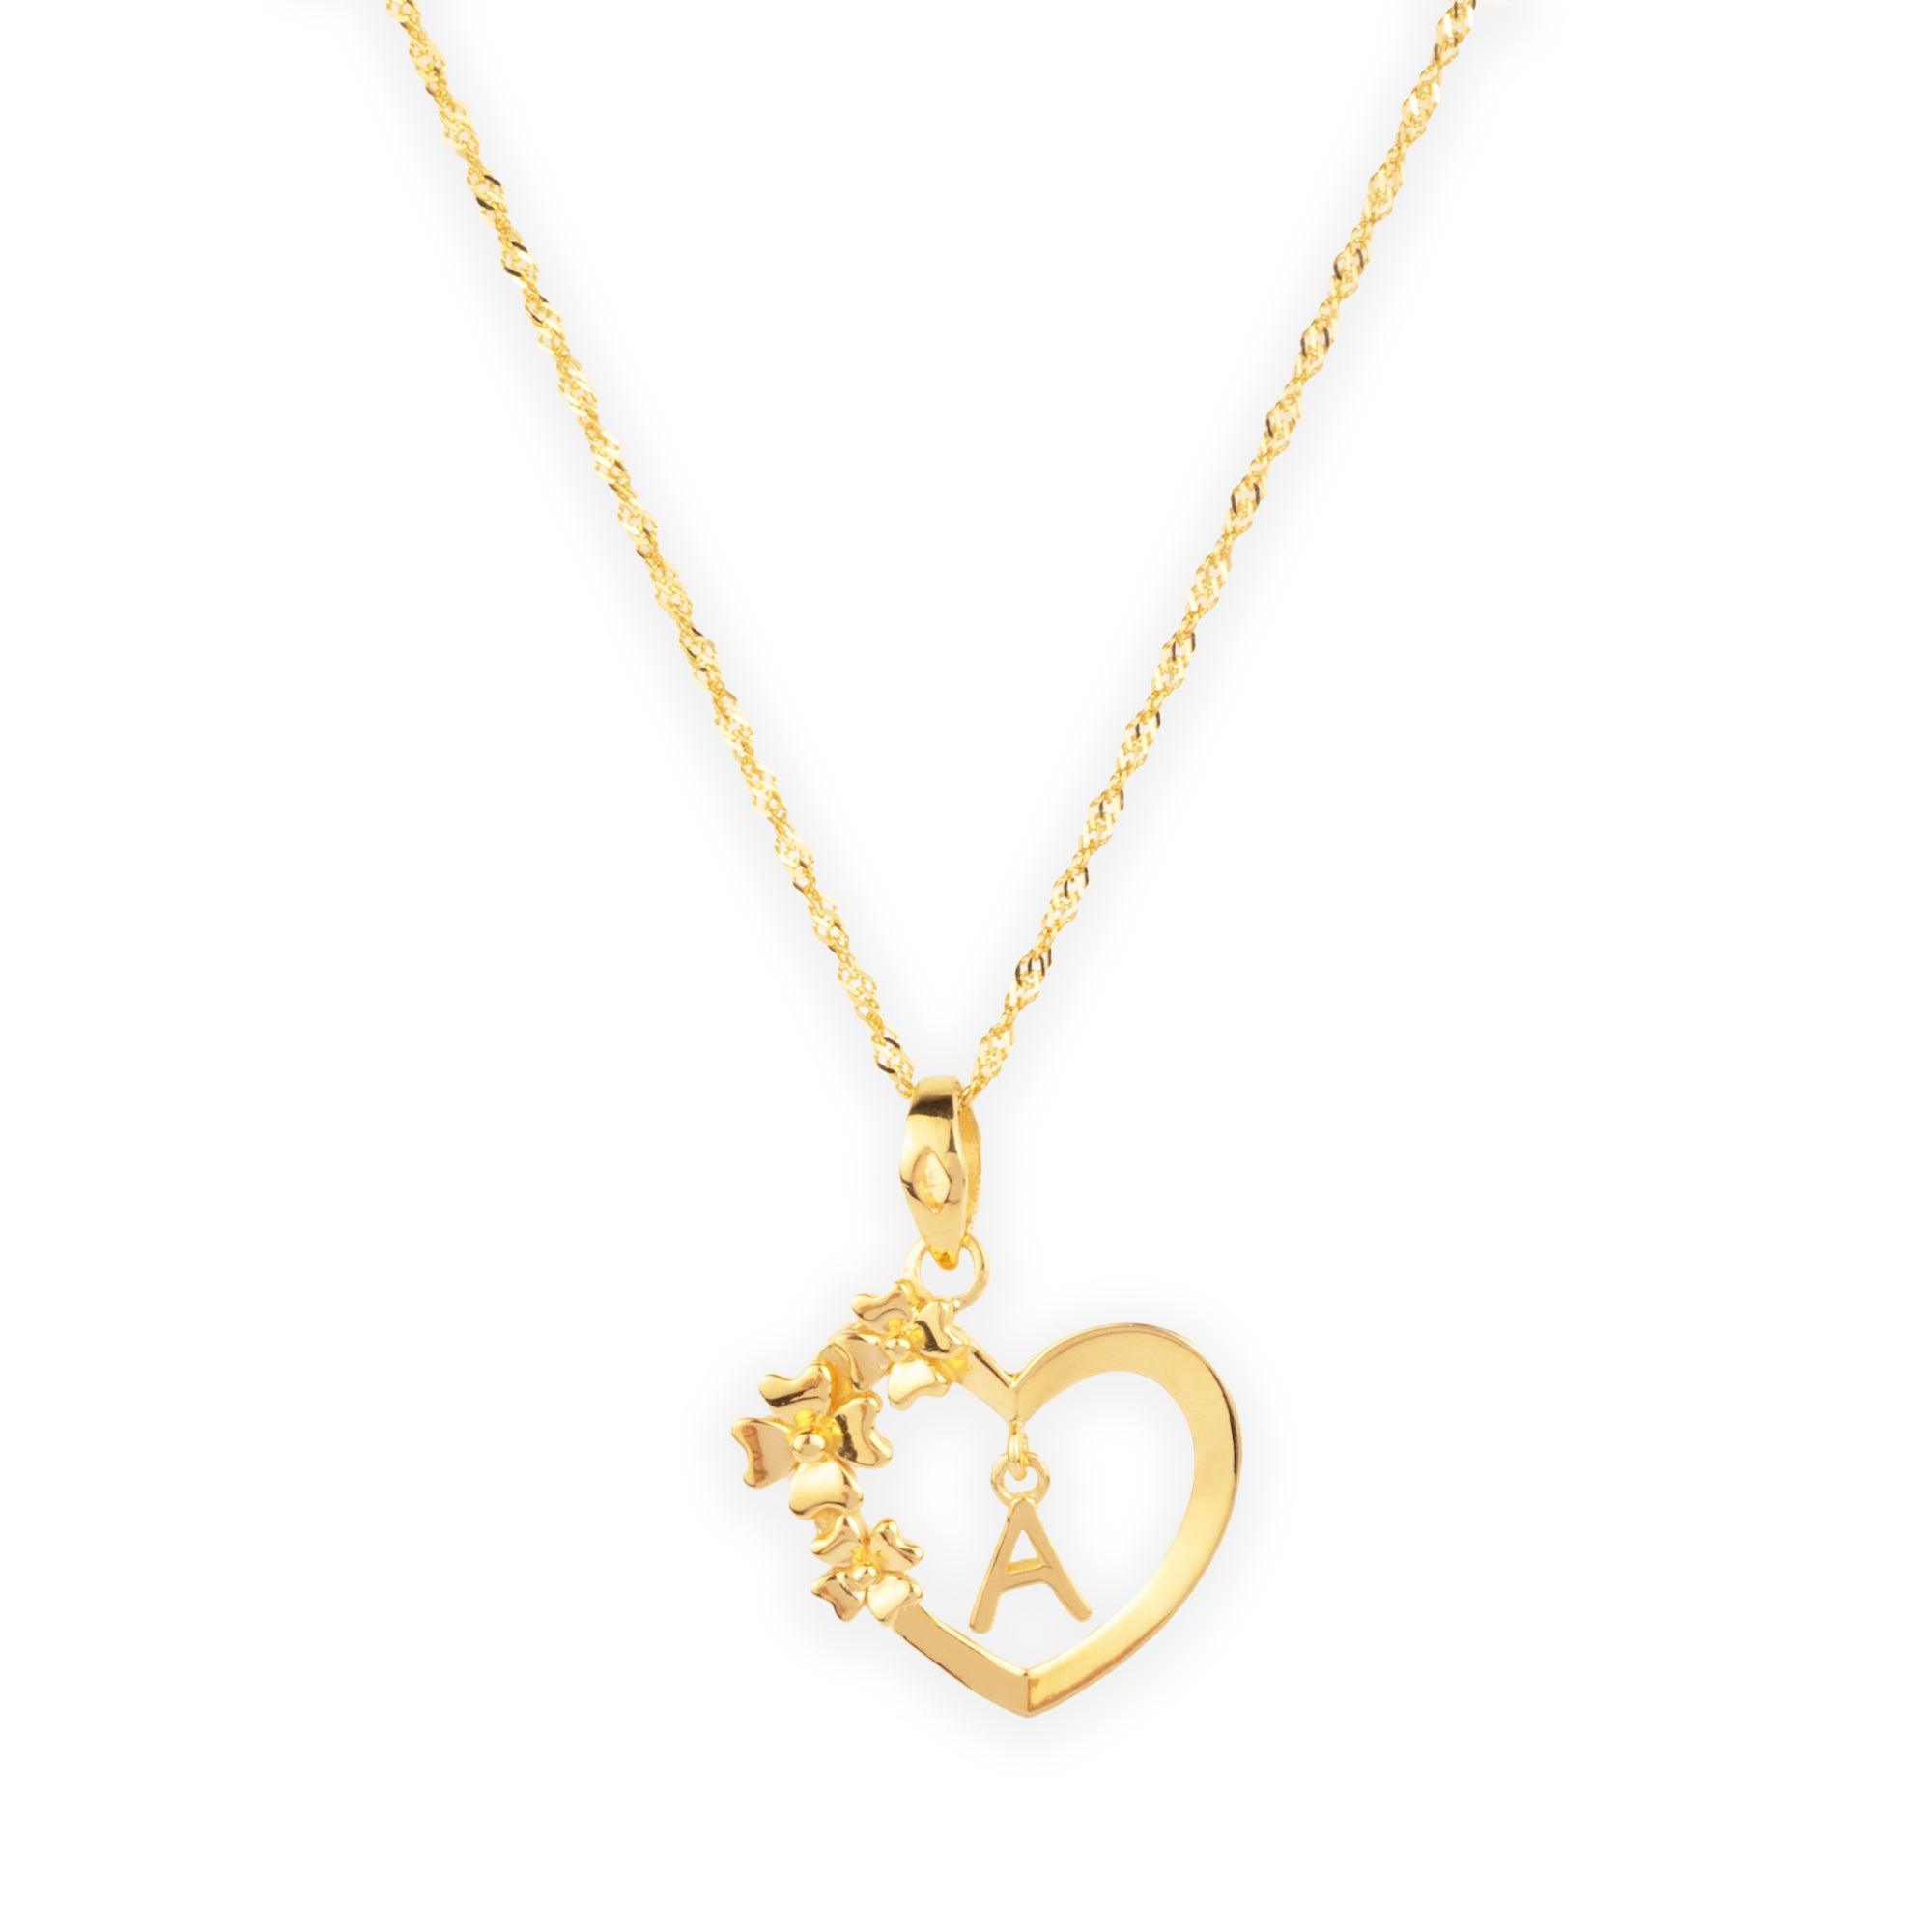 'A' 22ct Gold Heart Shape Initial with Flower Design Pendant P-7035 - Minar Jewellers